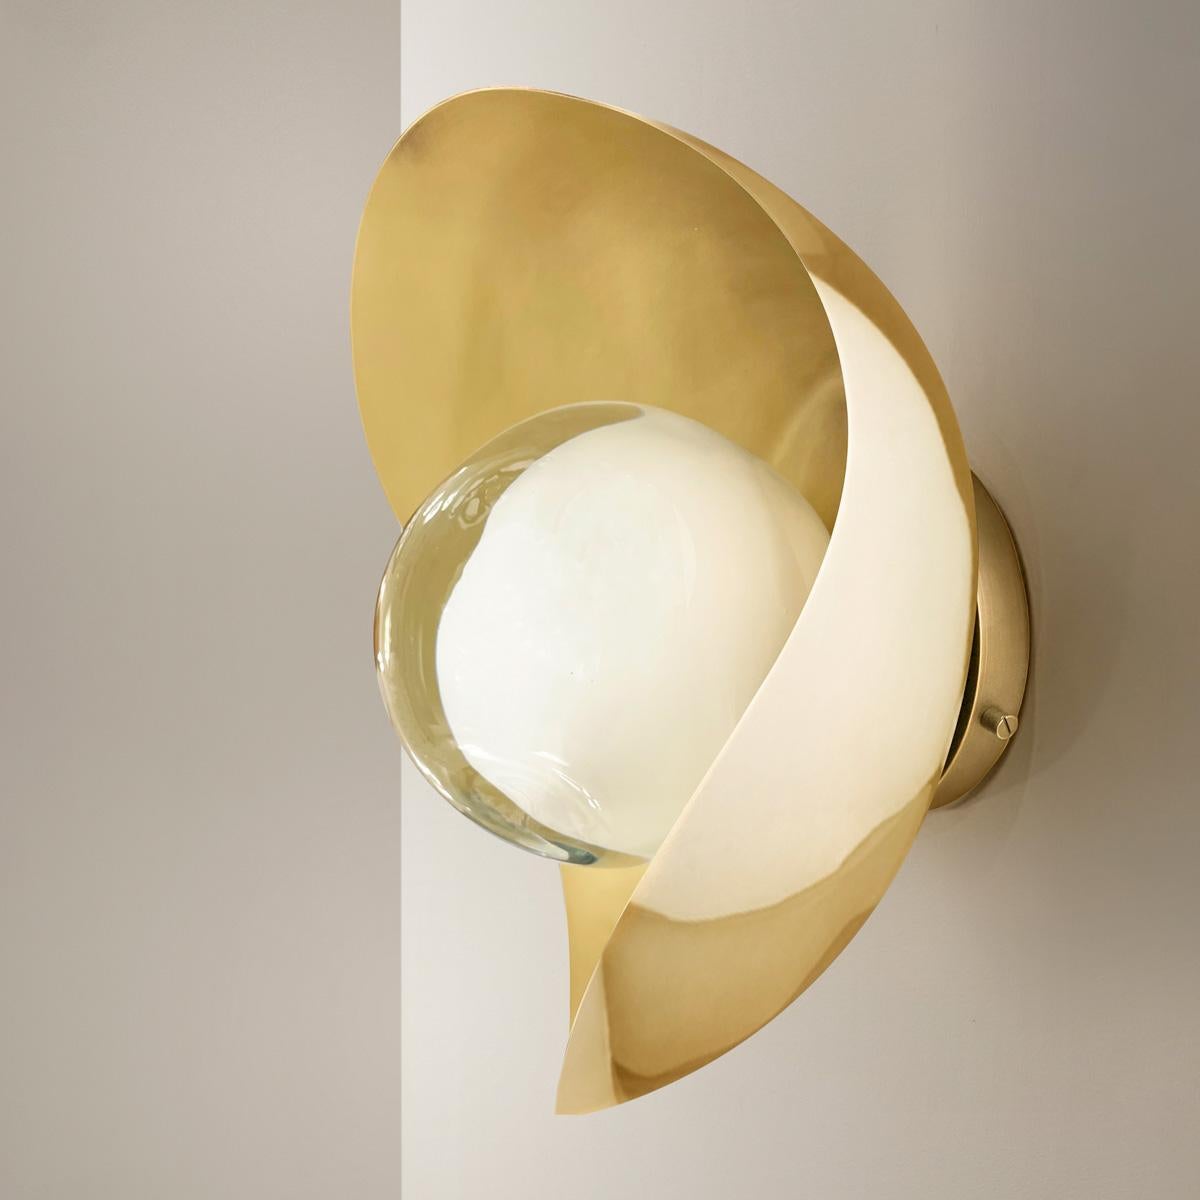 Contemporary Perla Wall Light by Gaspare Asaro-Polished Copper and Sand White Finish For Sale